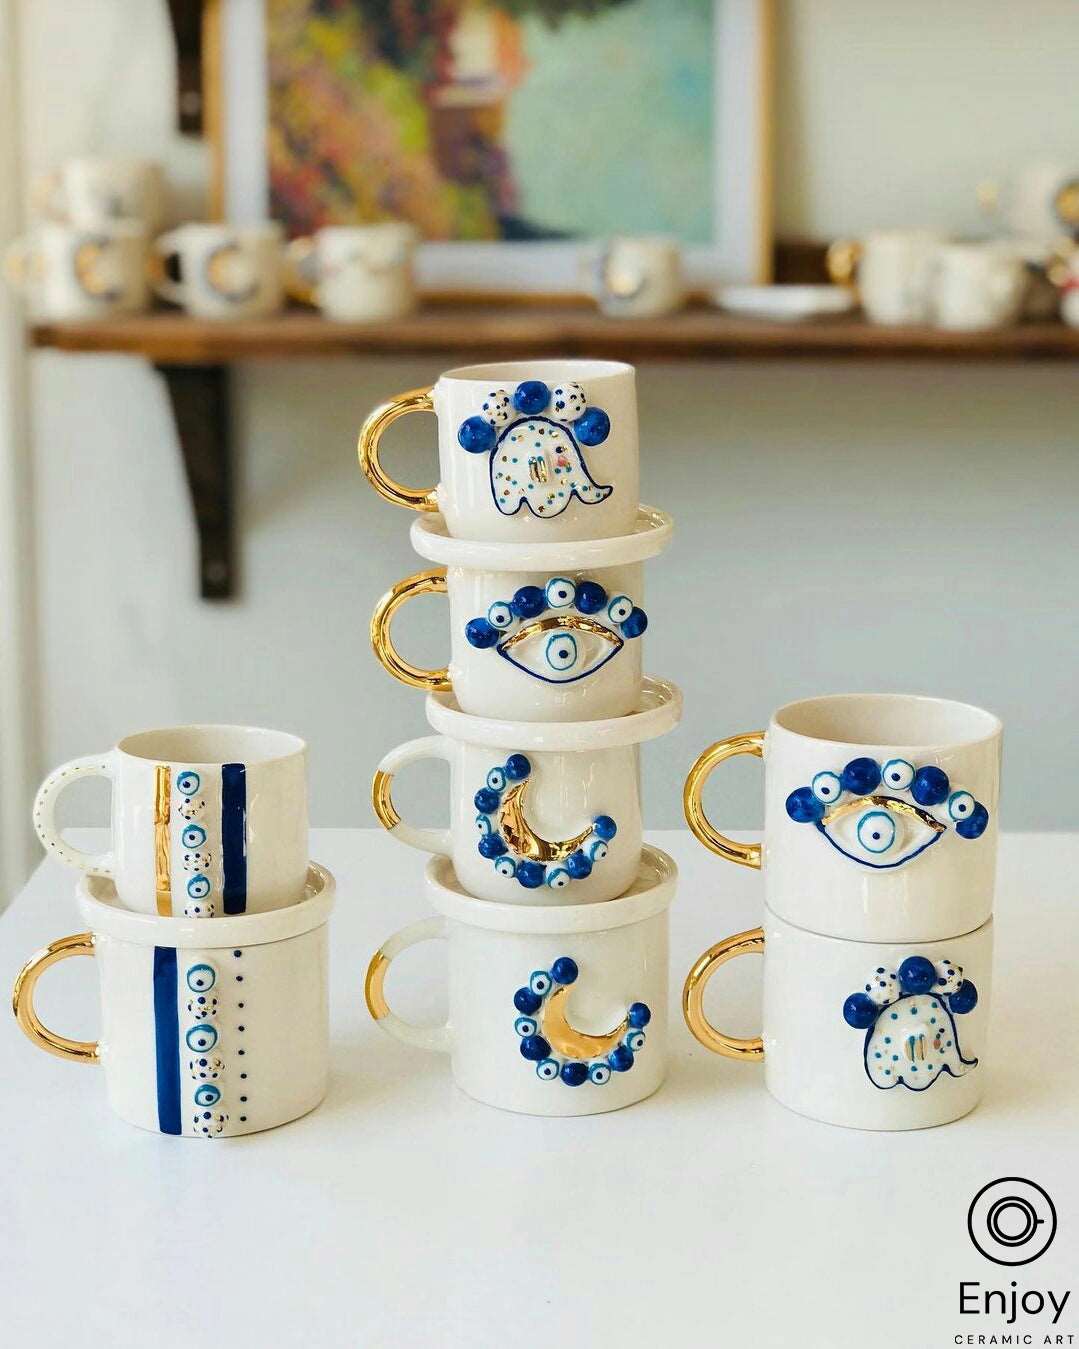 Stacked 'Blue Moon' ceramic mugs with gold handles, adorned with blue evil eye beads and crescent moon designs, displayed in a well-lit art studio.